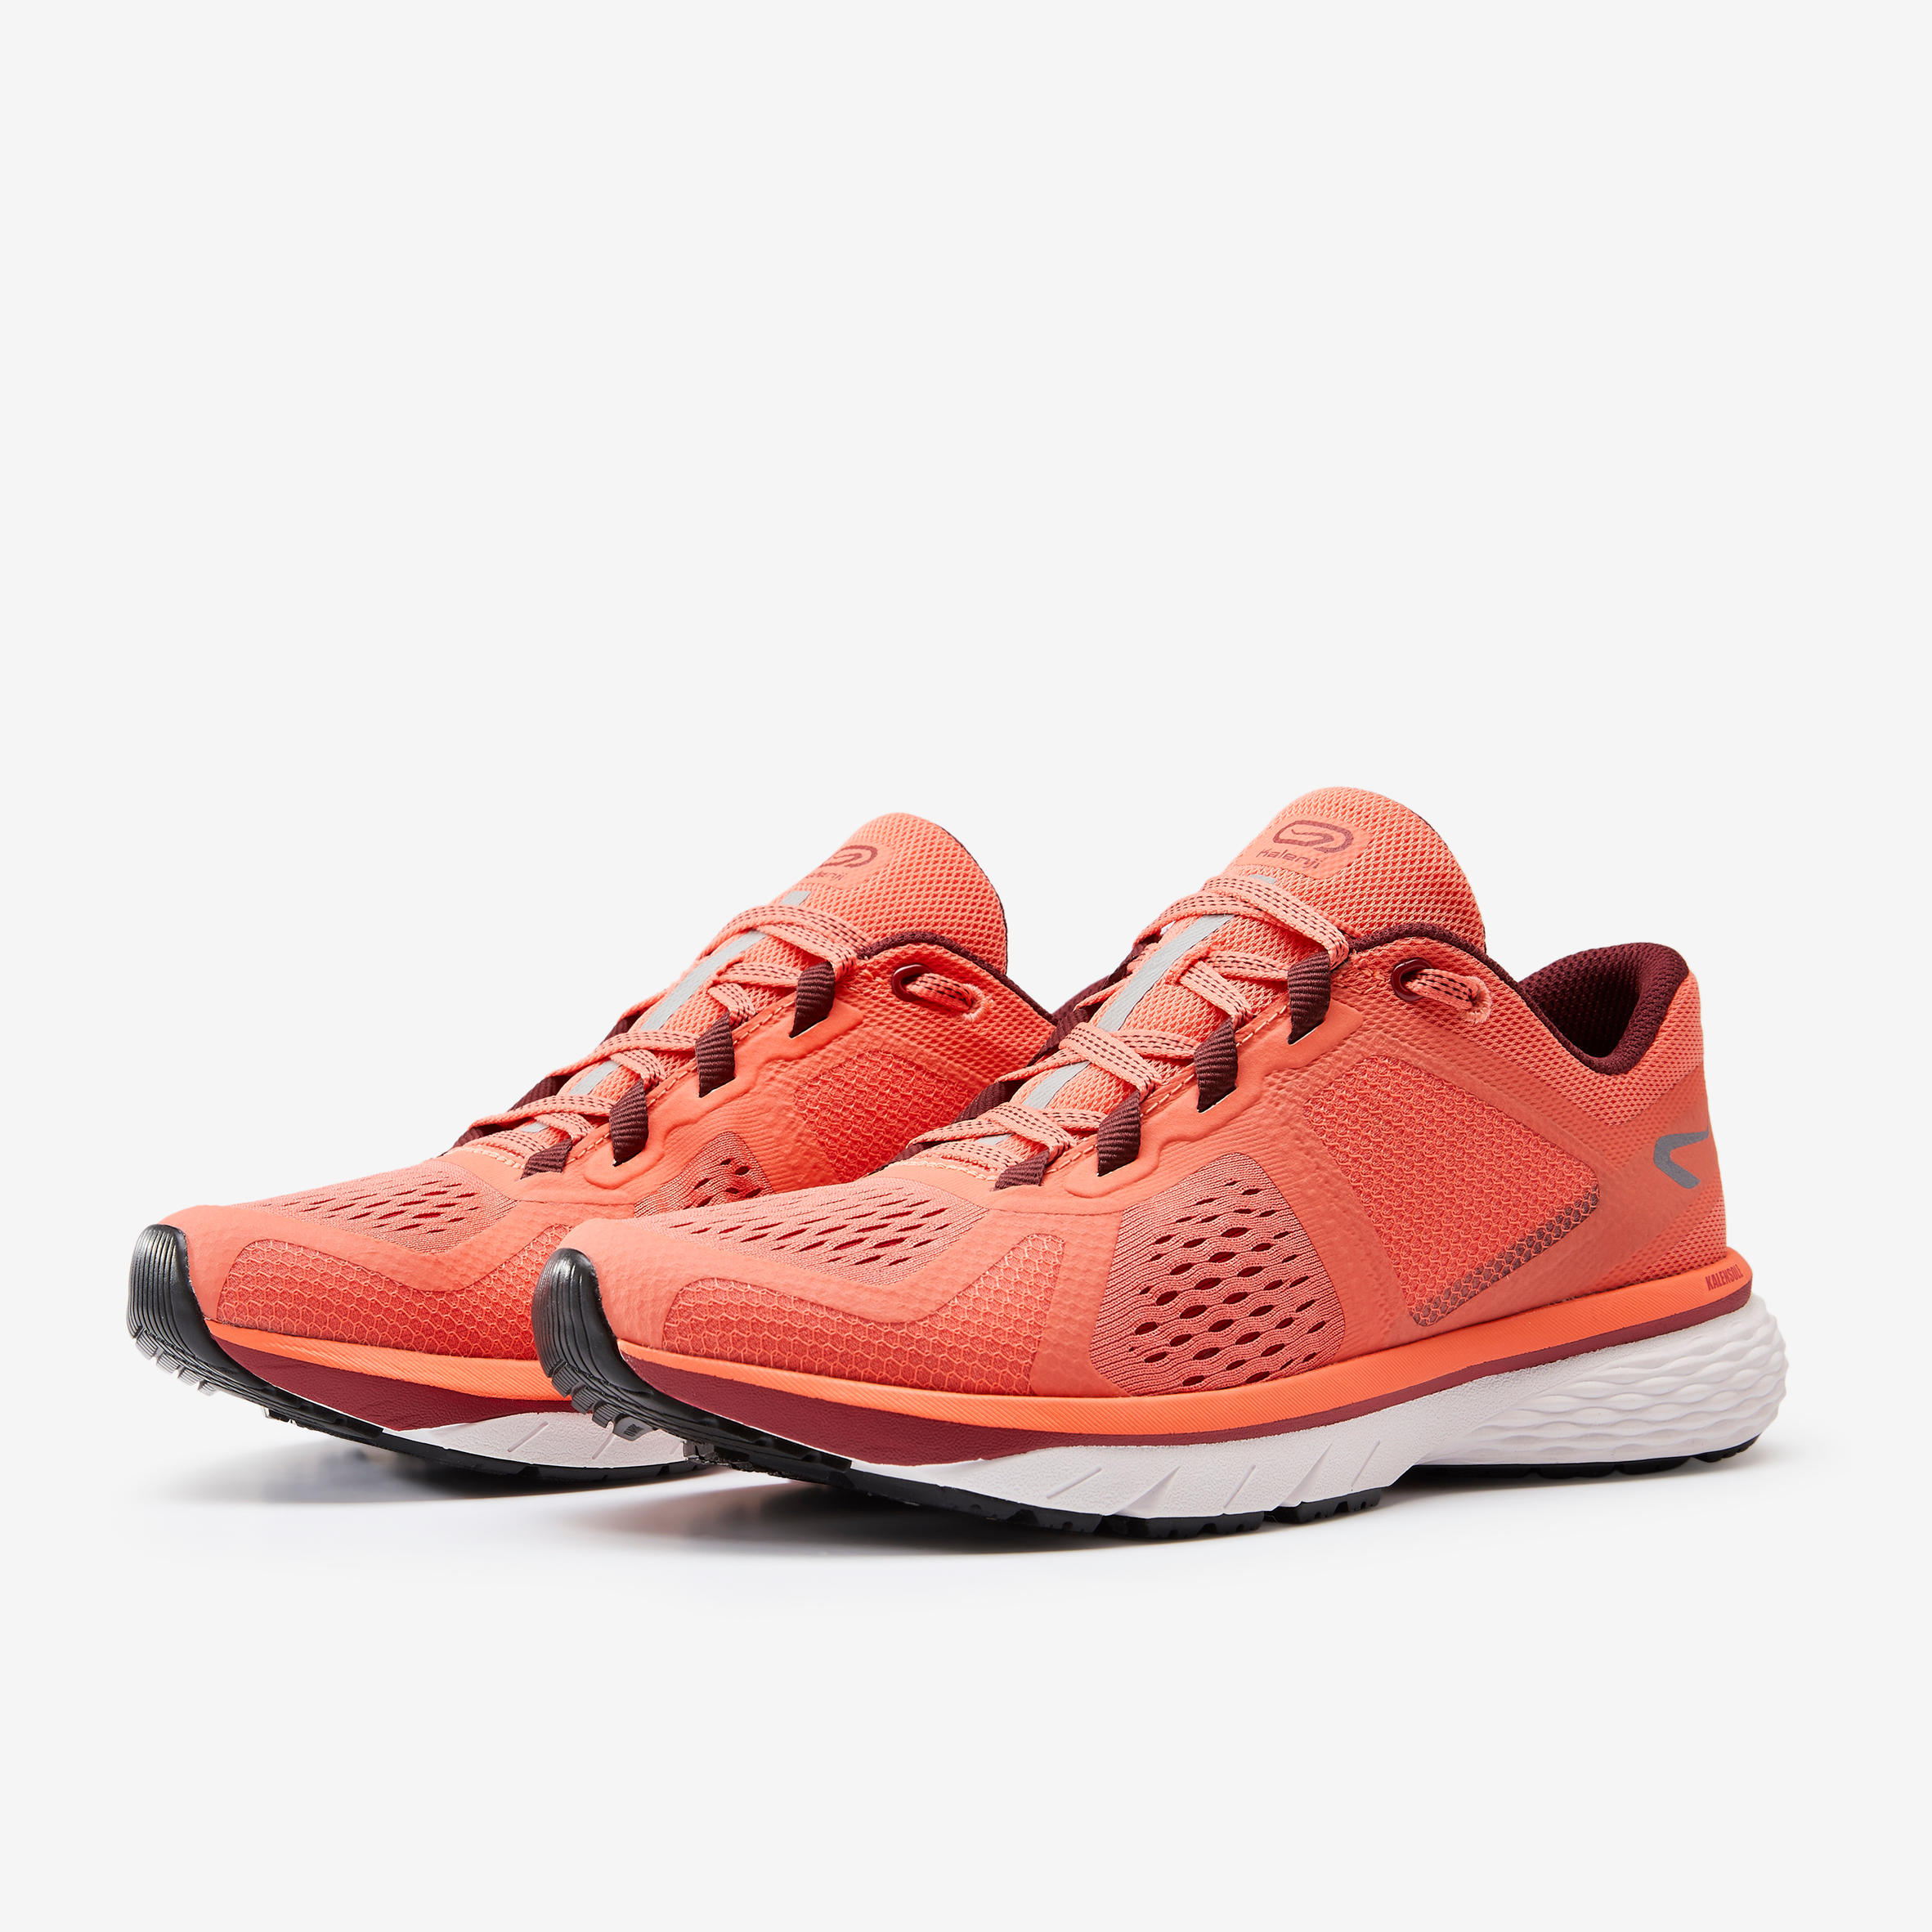 RUNNING SHOES - CORAL - Decathlon